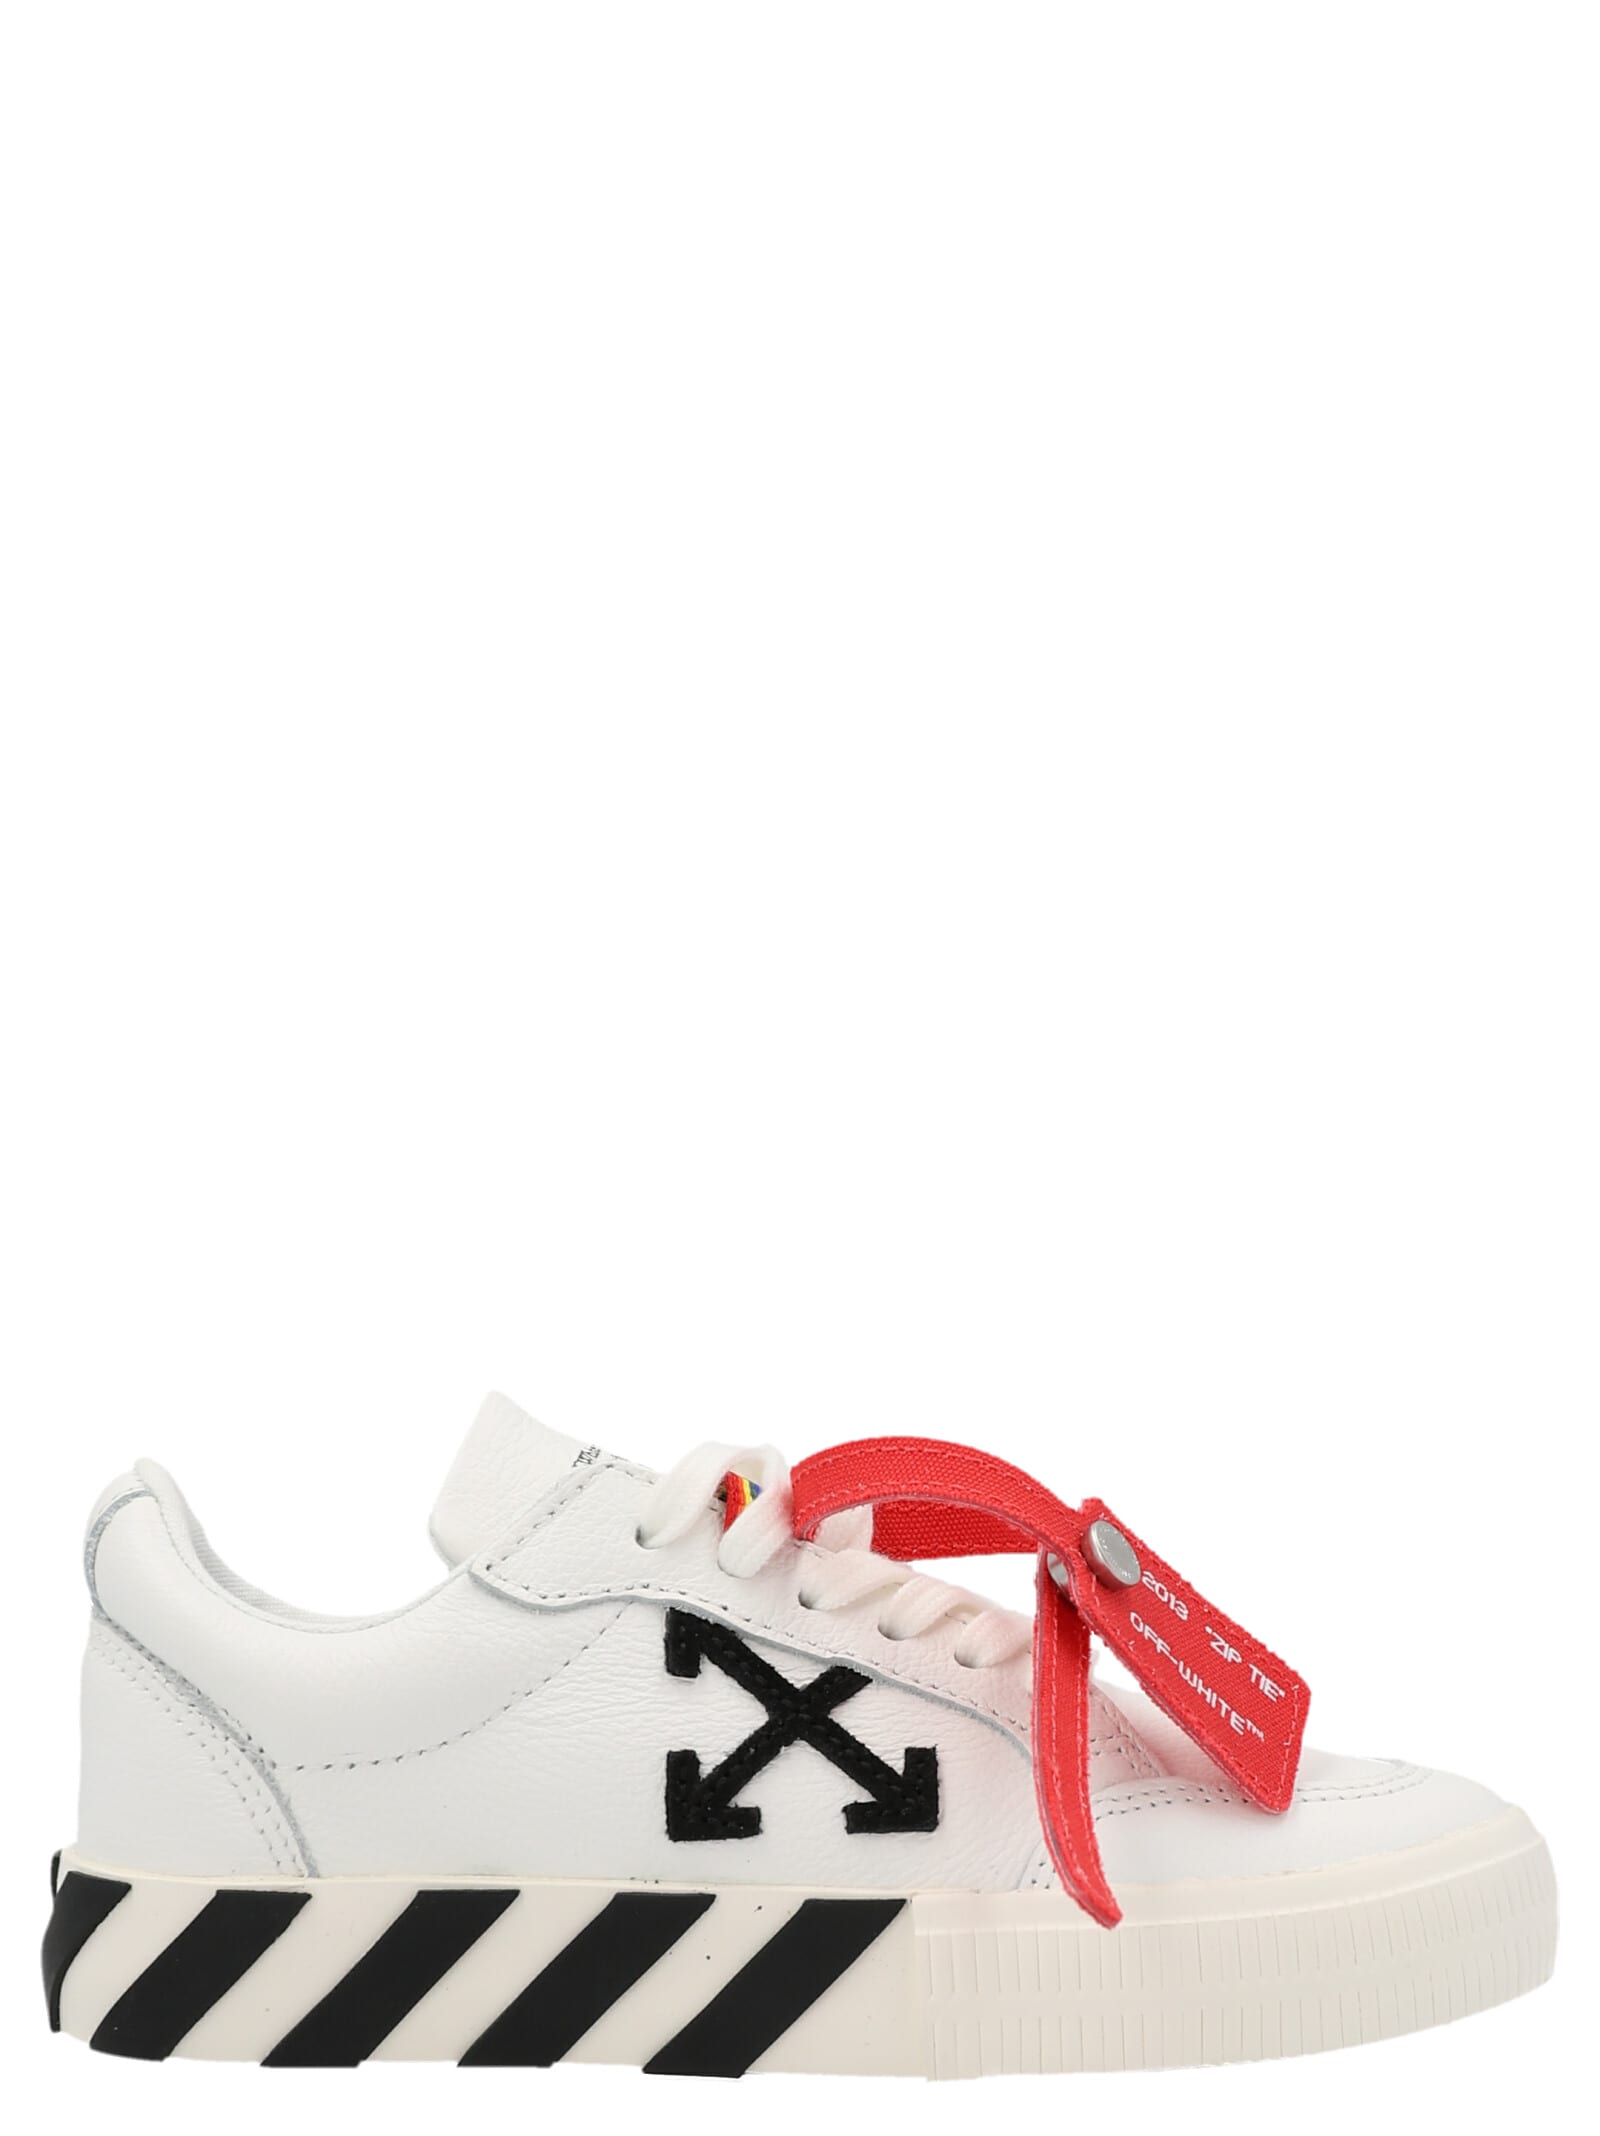 Off-White vulcanized Lace Up Sneakers